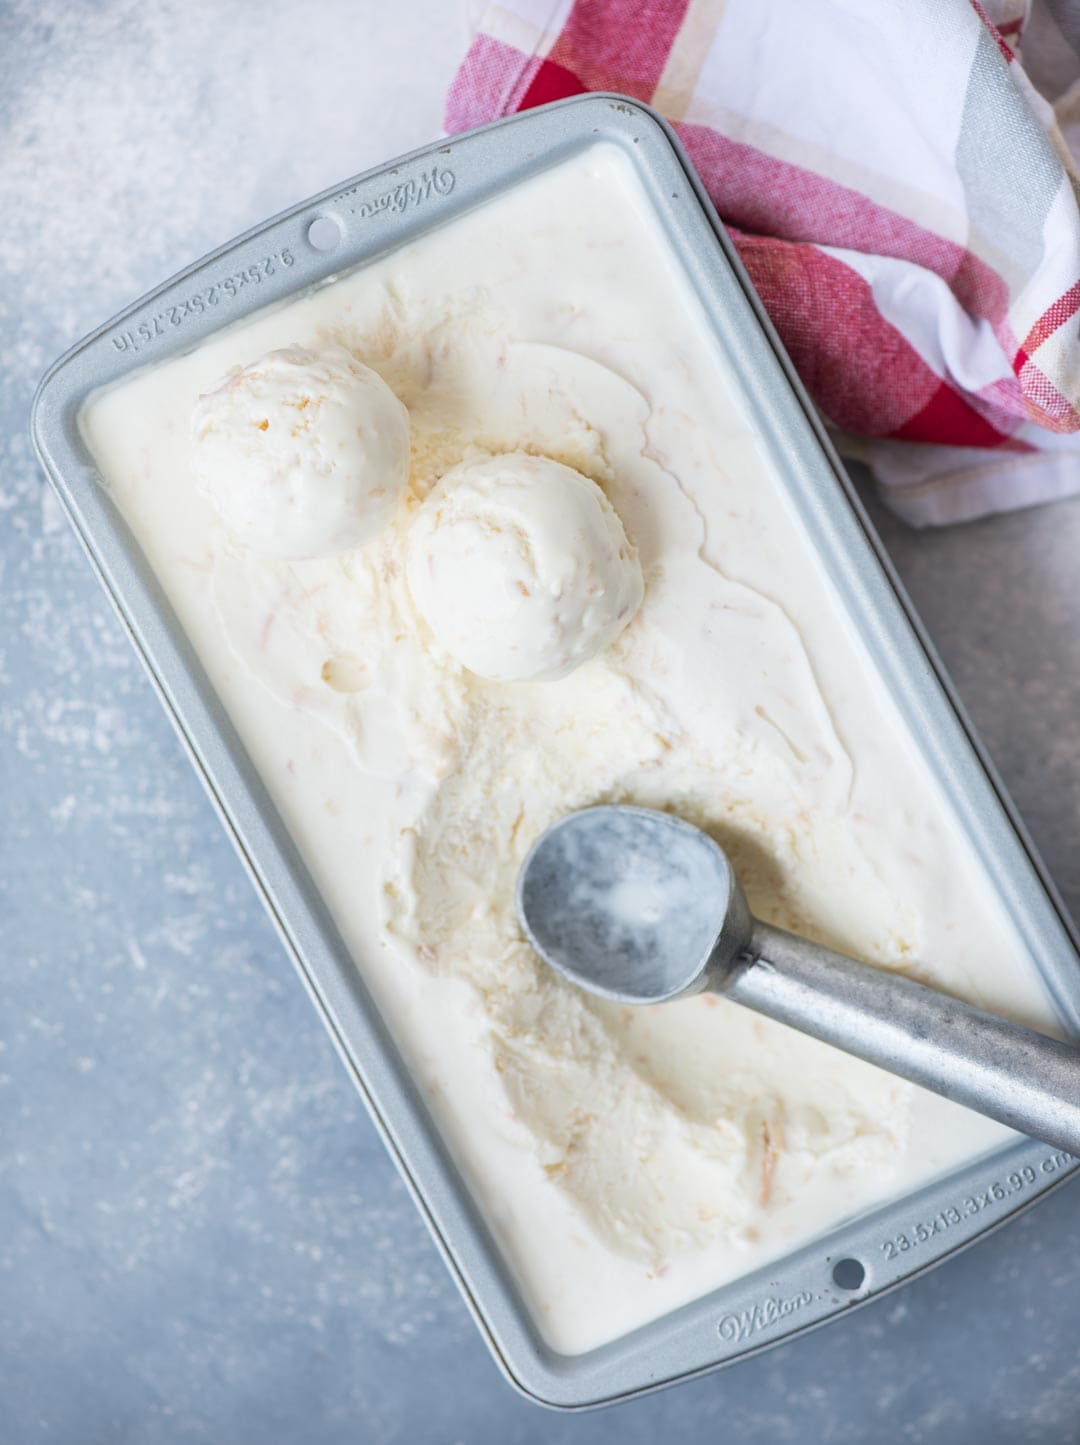 With real coconut flavour from Coconut milk, this Coconut Ice Cream is so easy to make. It is no churn and you don't even need an Ice cream maker. Beautiful light texture and Creamy, this Coconut Ice Cream is a must try in Summer.